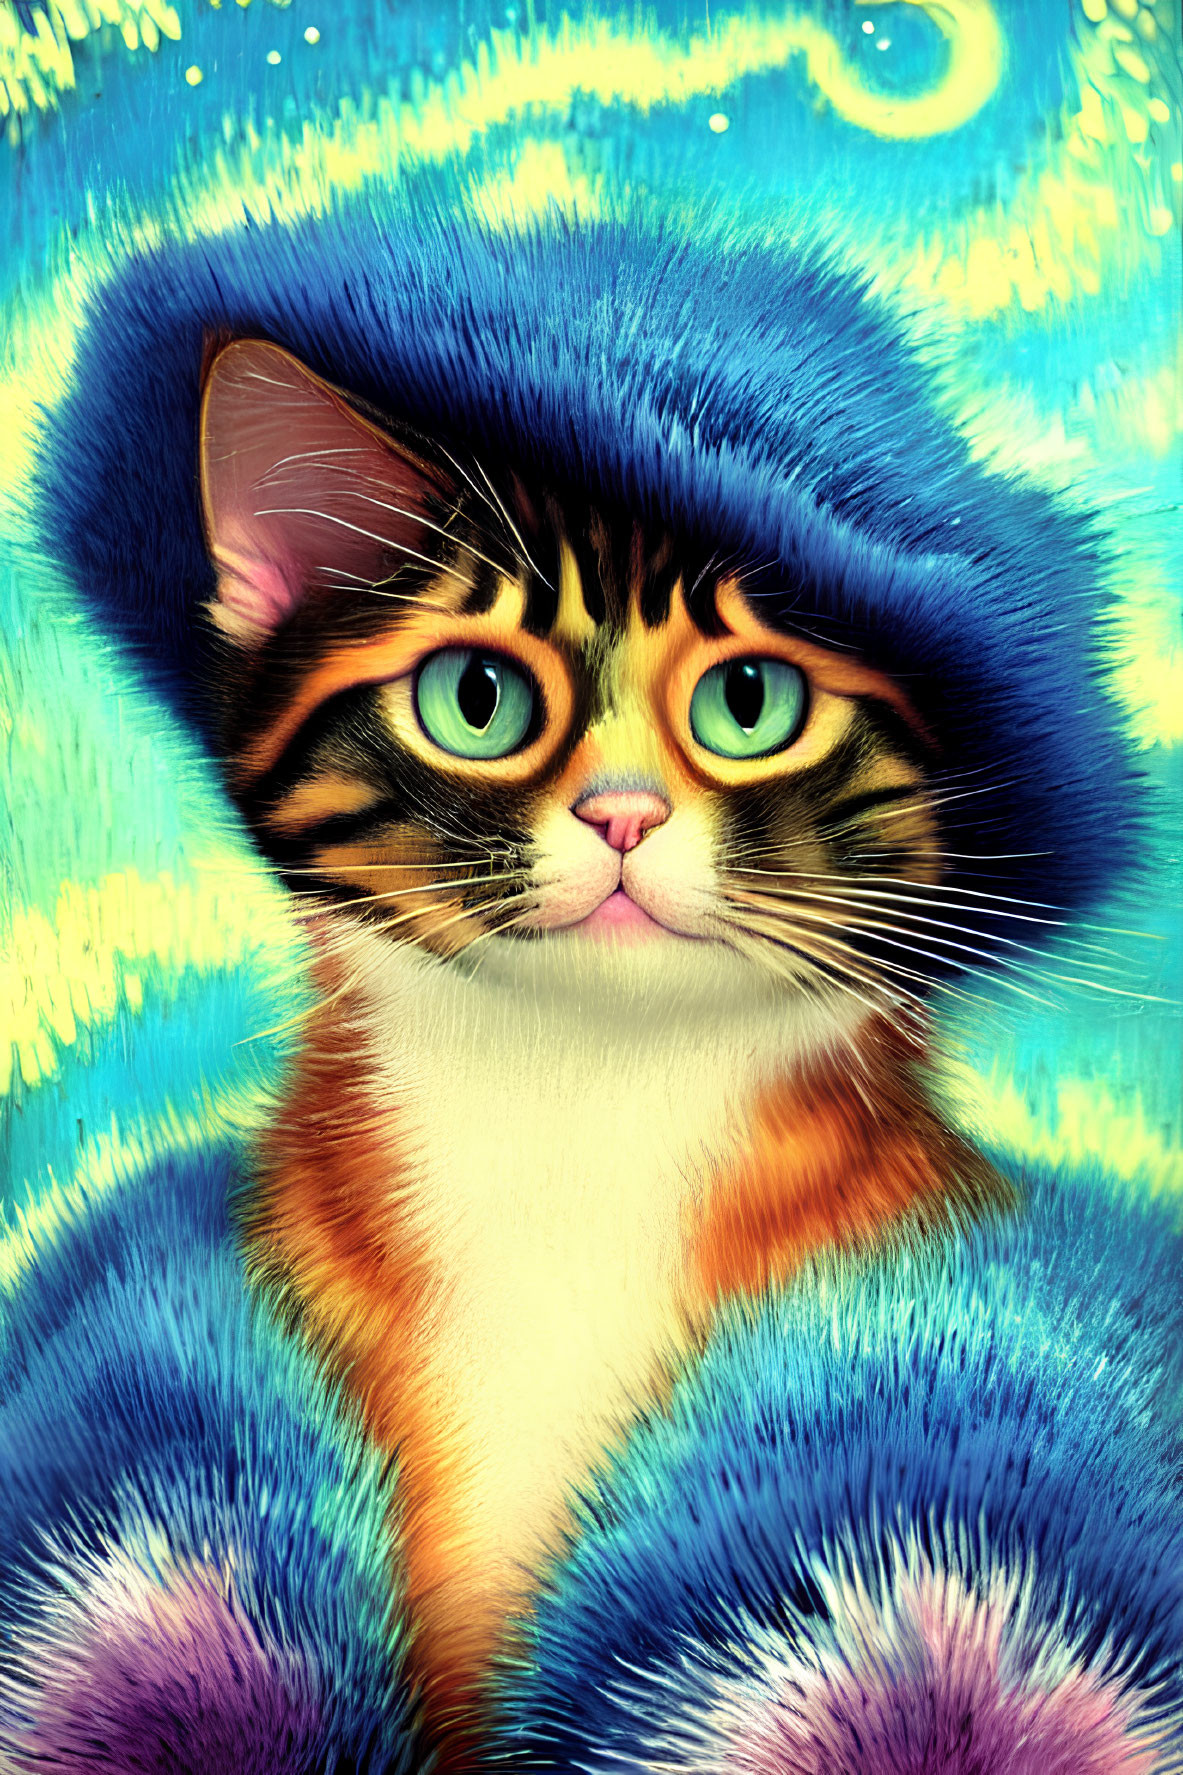 Colorful Digital Artwork: Cat with Green Eyes and Blue Hat on Van Gogh-Inspired